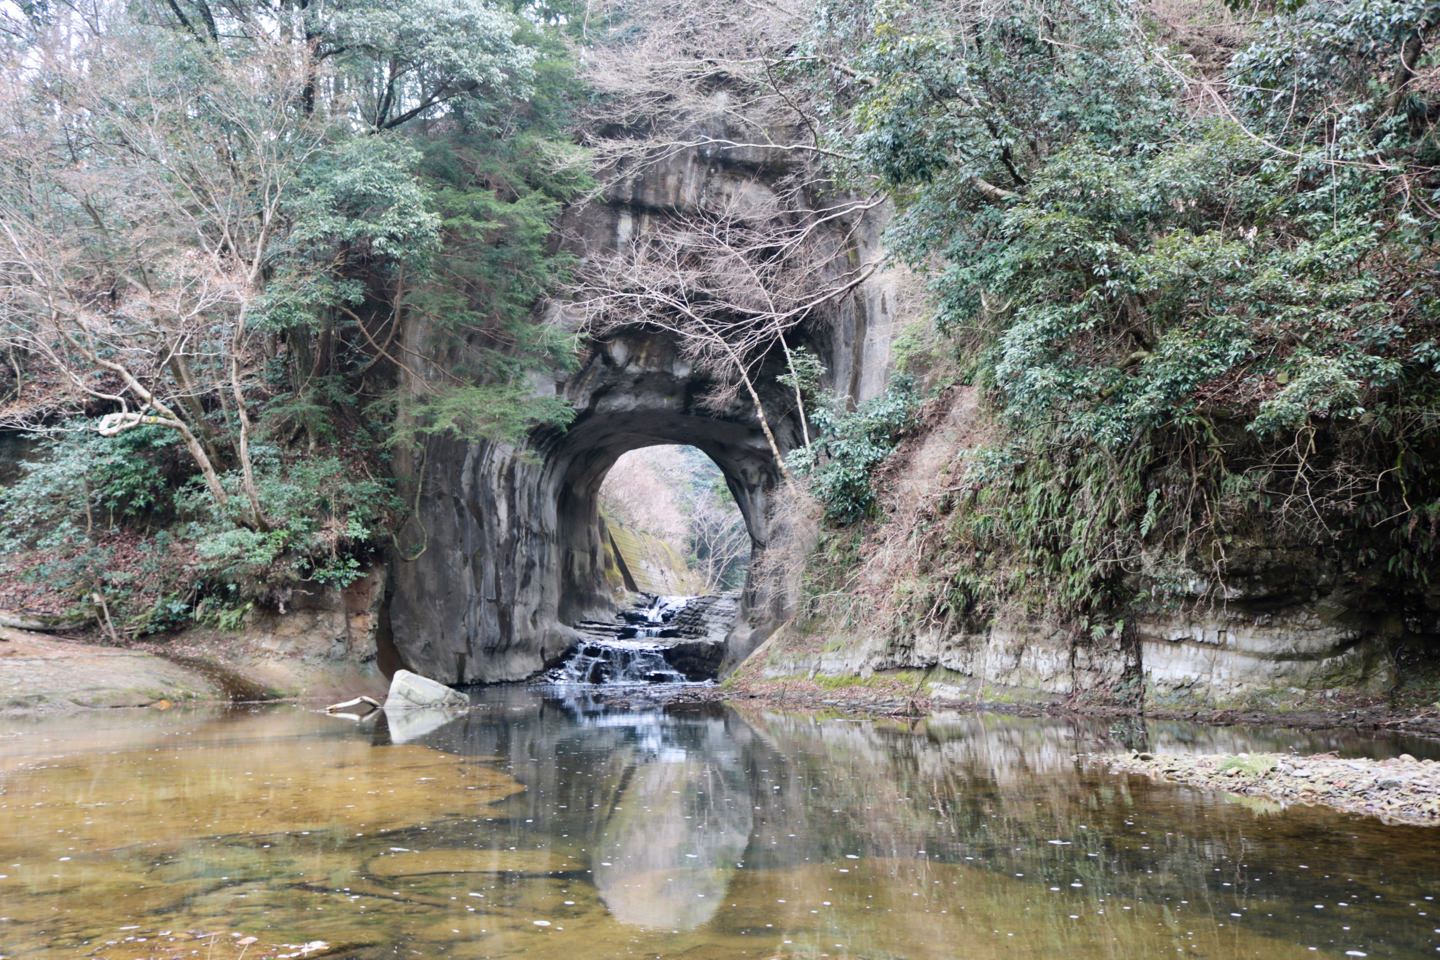 Kameiwa Cave, which mistakenly came to be known as Nomizo Falls